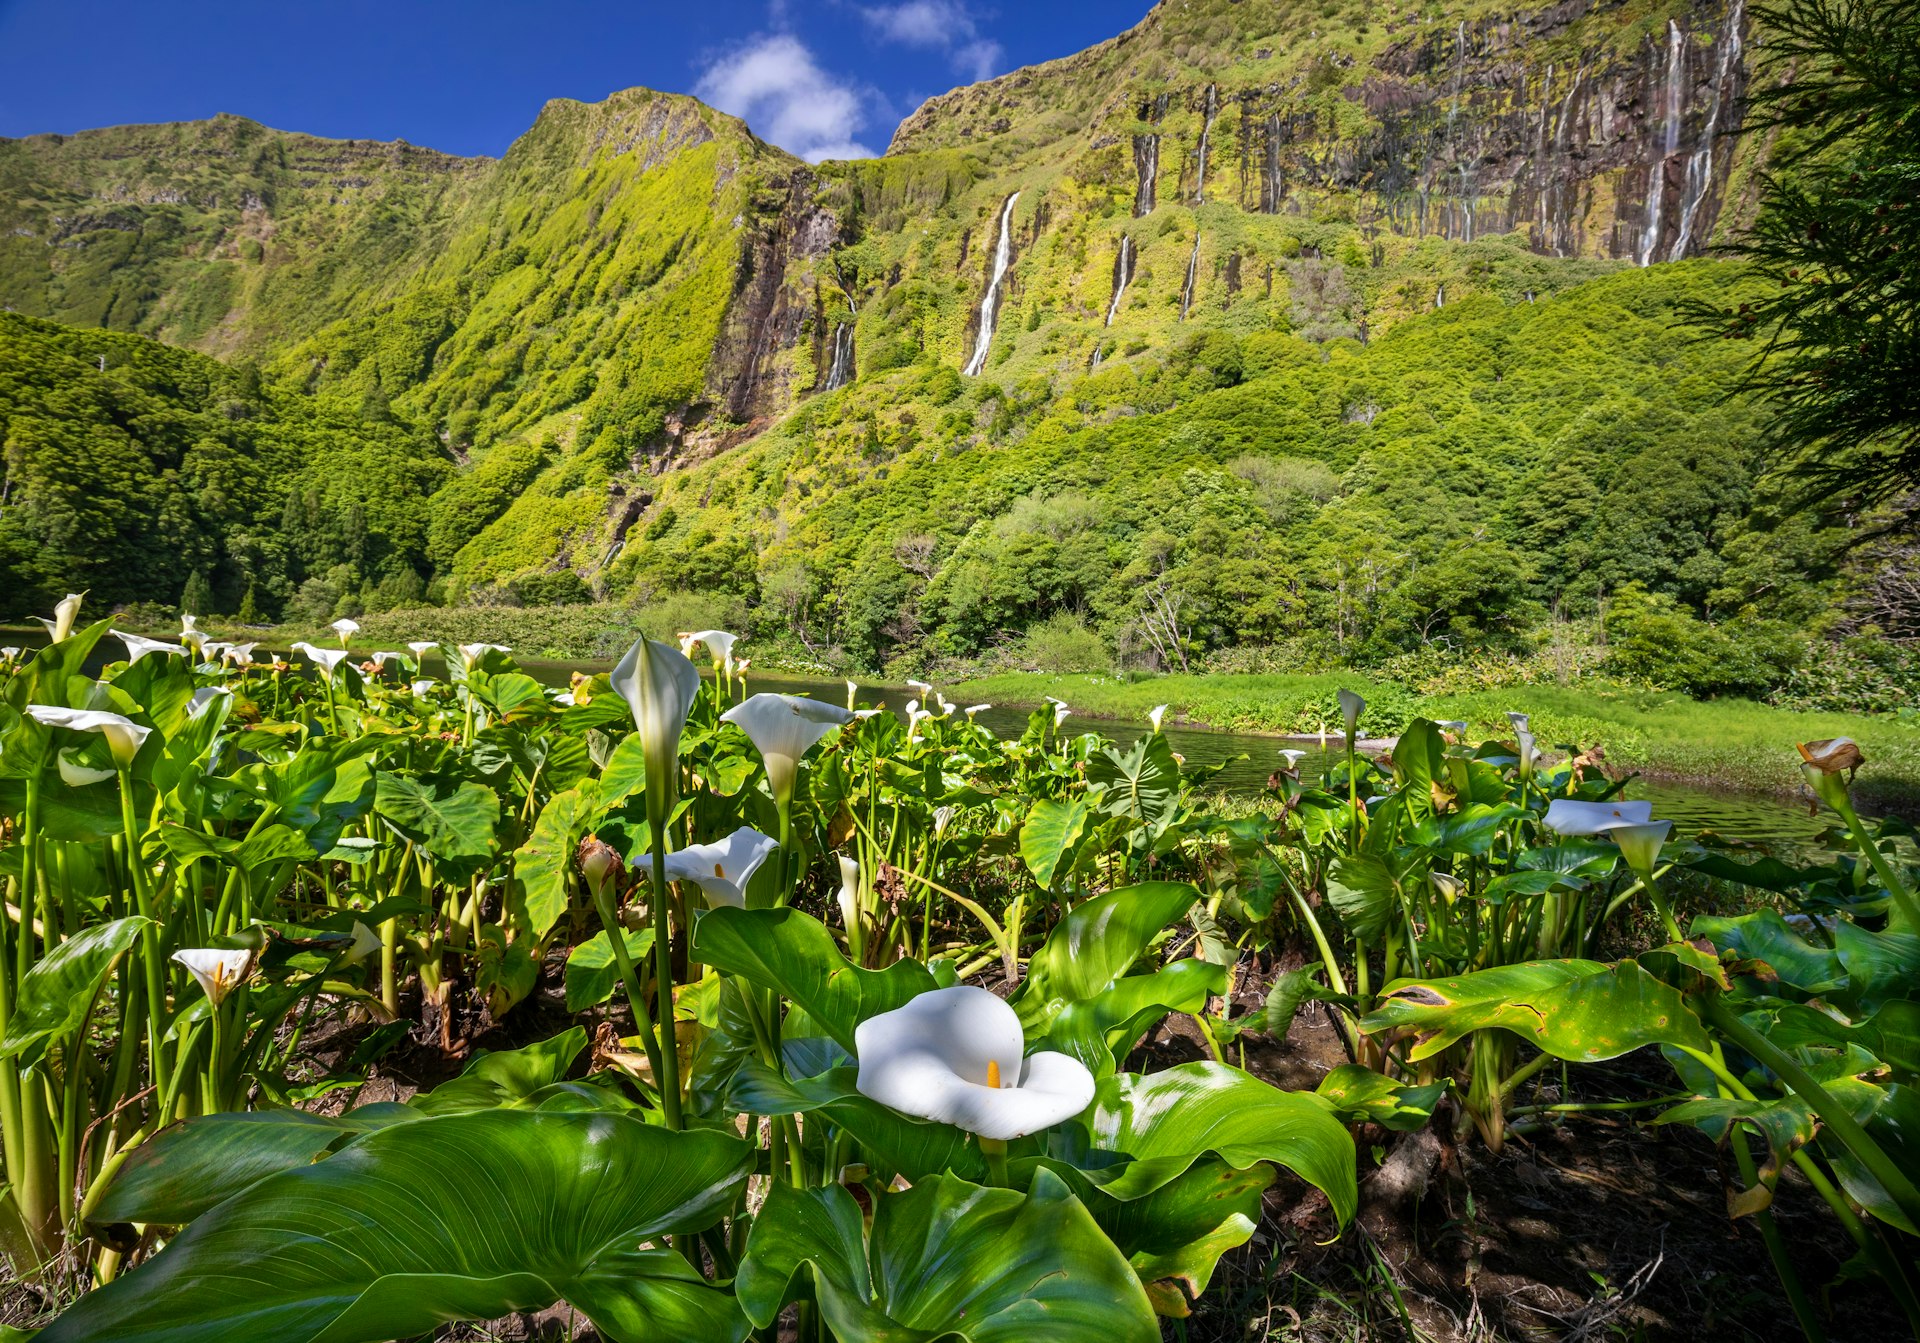 Calla lilies are in the foreground of a verdant tropical landscape, with waterfalls tumbling from the top of a foliage-covered cliff face 